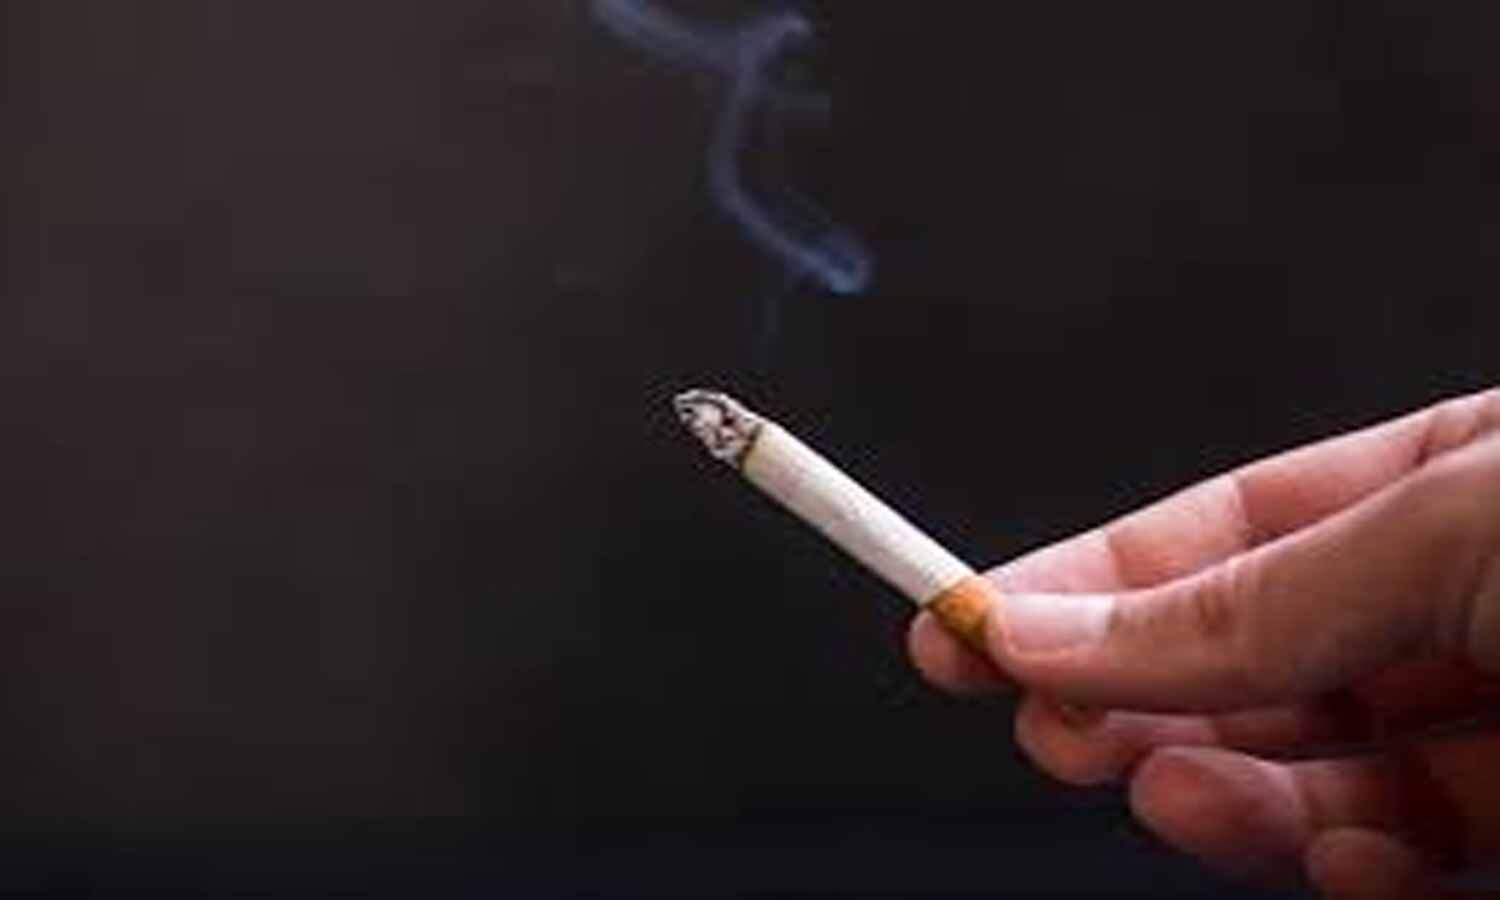 Smoking directly linked to a higher risk of subarachnoid hemorrhage